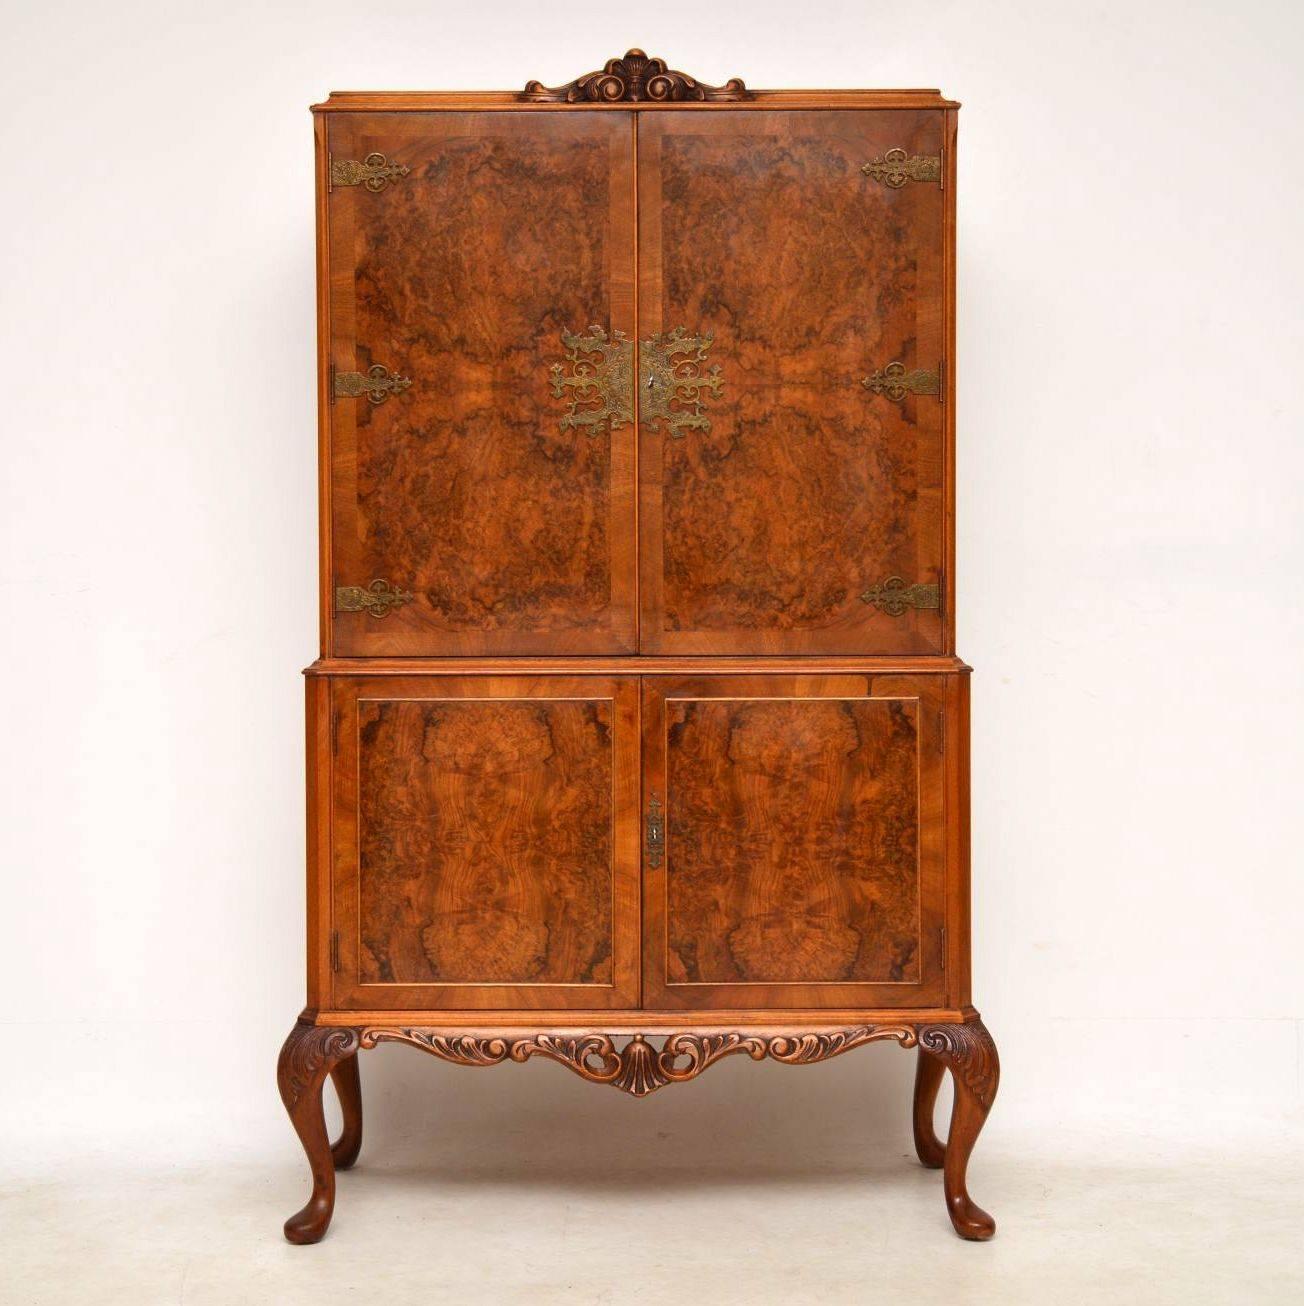 Antique Queen Anne style walnut cocktail drinks cabinet in good condition and dating from around the 1930s period. All the door panels are strongly patterned burr walnut, while the top doors have etched brass hinges and escutcheons. It’s carved on